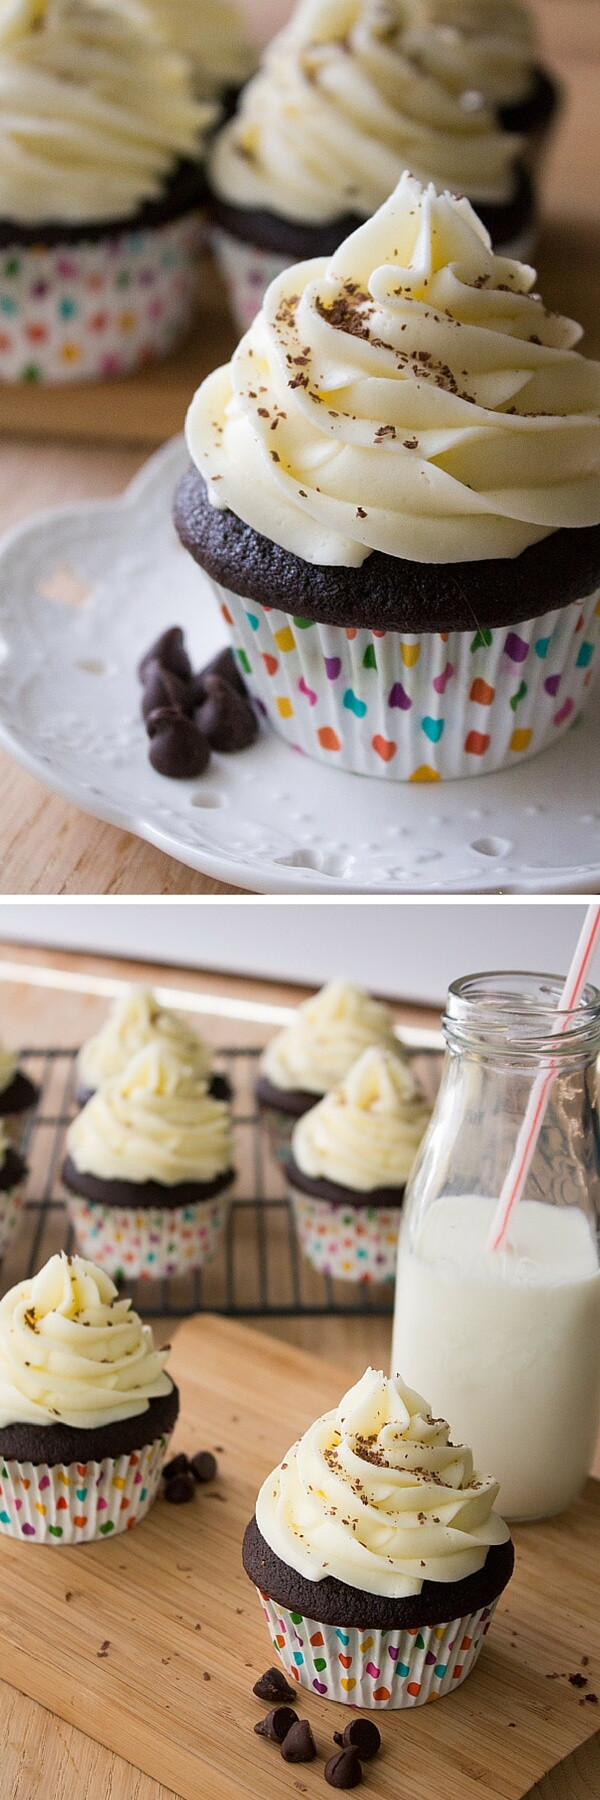 Chocolate Cupcakes With Cream Cheese Frosting
 Chocolate Cupcakes with Cream Cheese Frosting